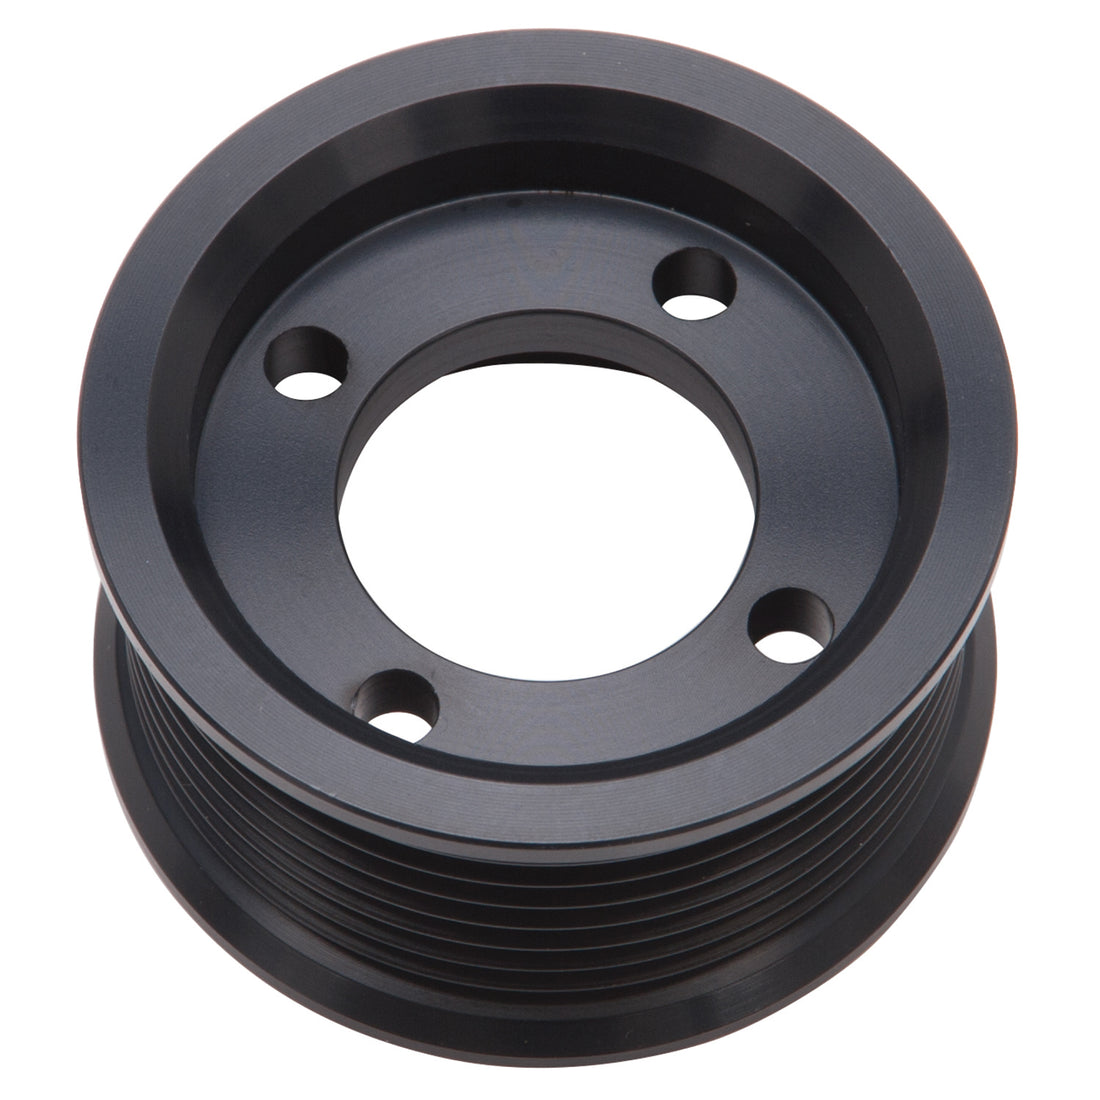 Edelbrock Competition Supercharger Pulley #15870 2.625 in. 8-Rib, Black Anodized Edelbrock